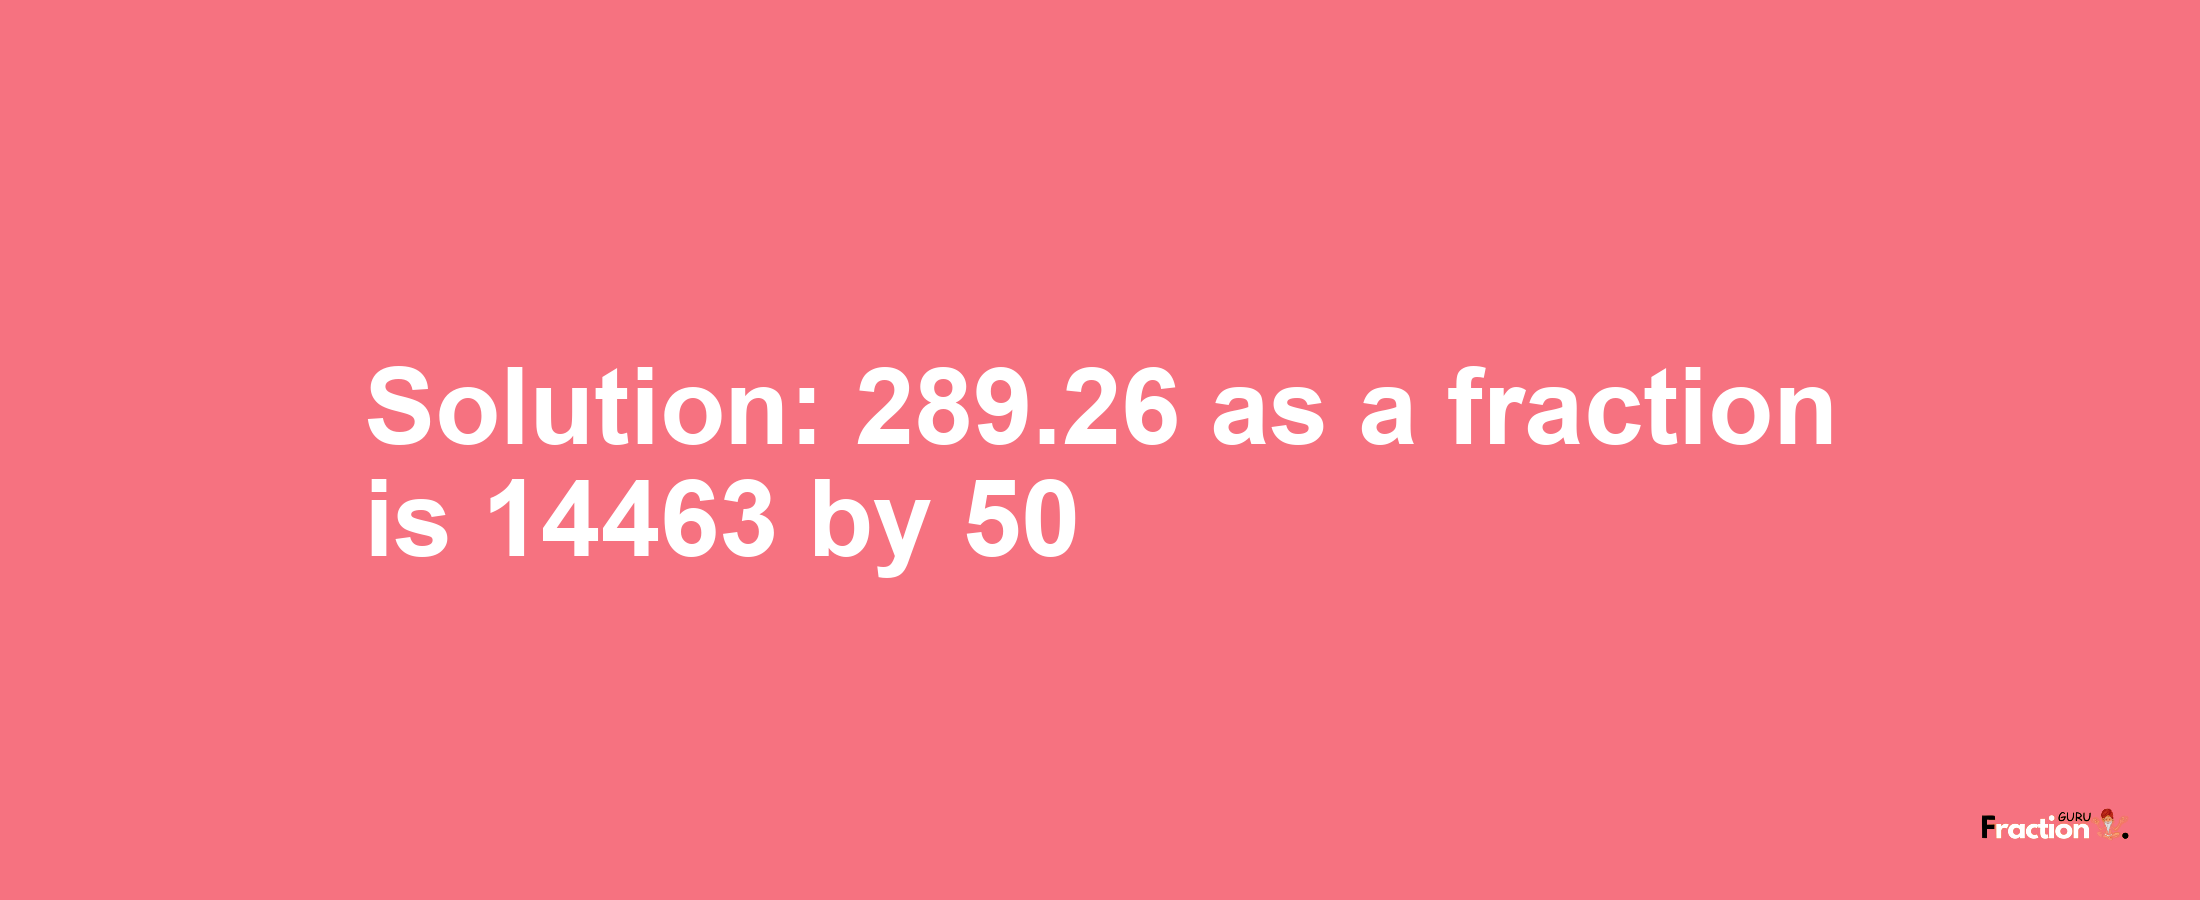 Solution:289.26 as a fraction is 14463/50